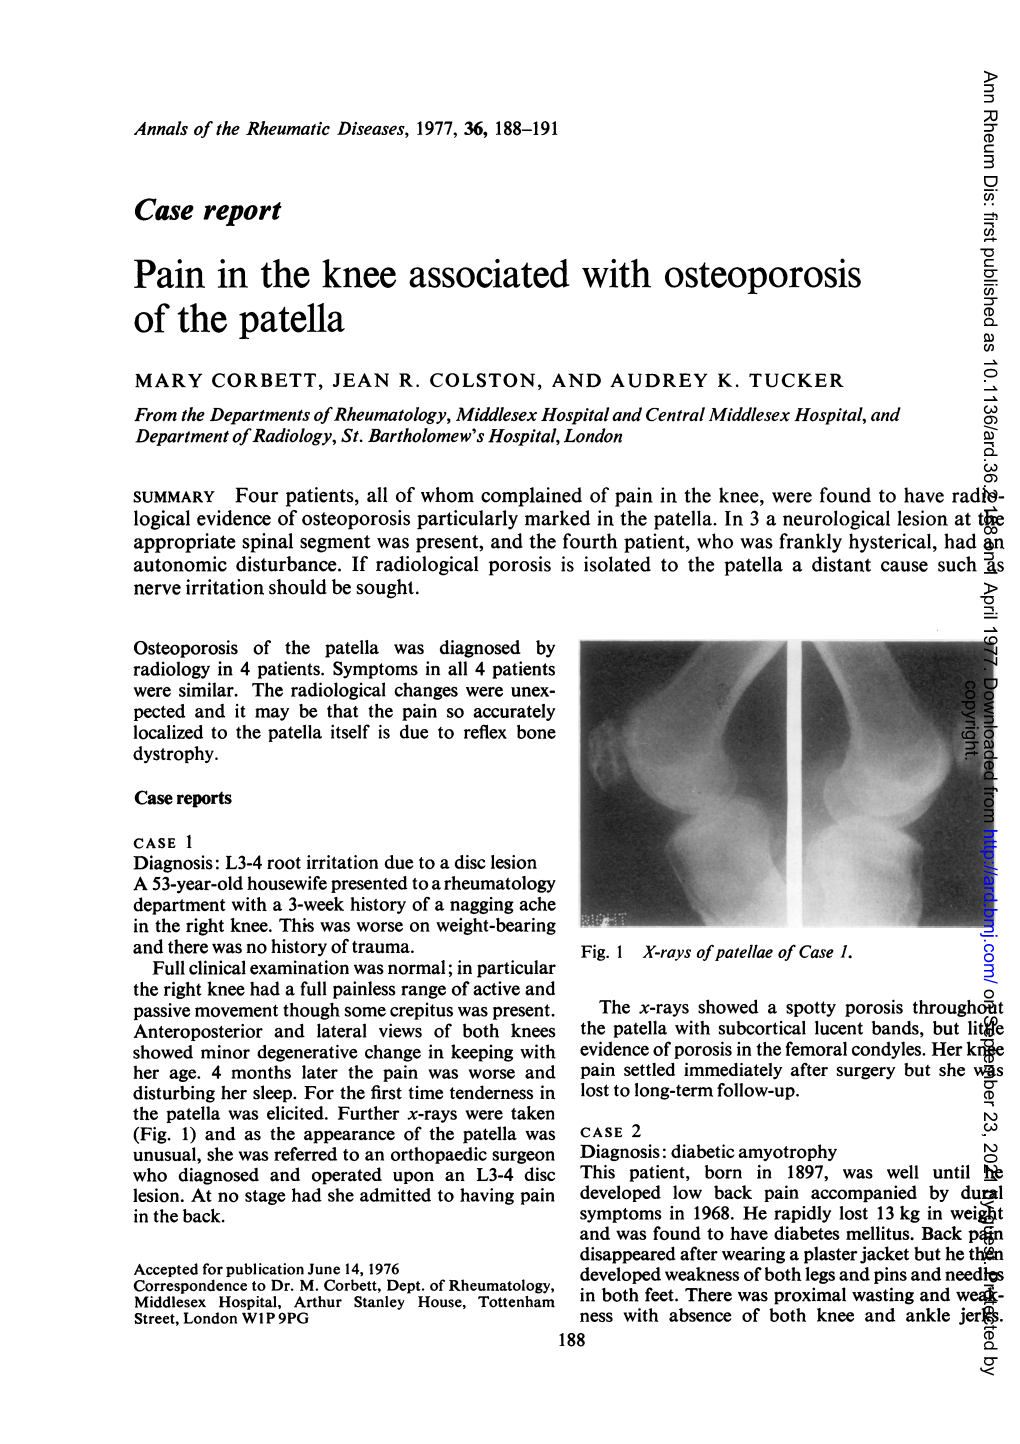 Pain in the Knee Associated with Osteoporosis of the Patella